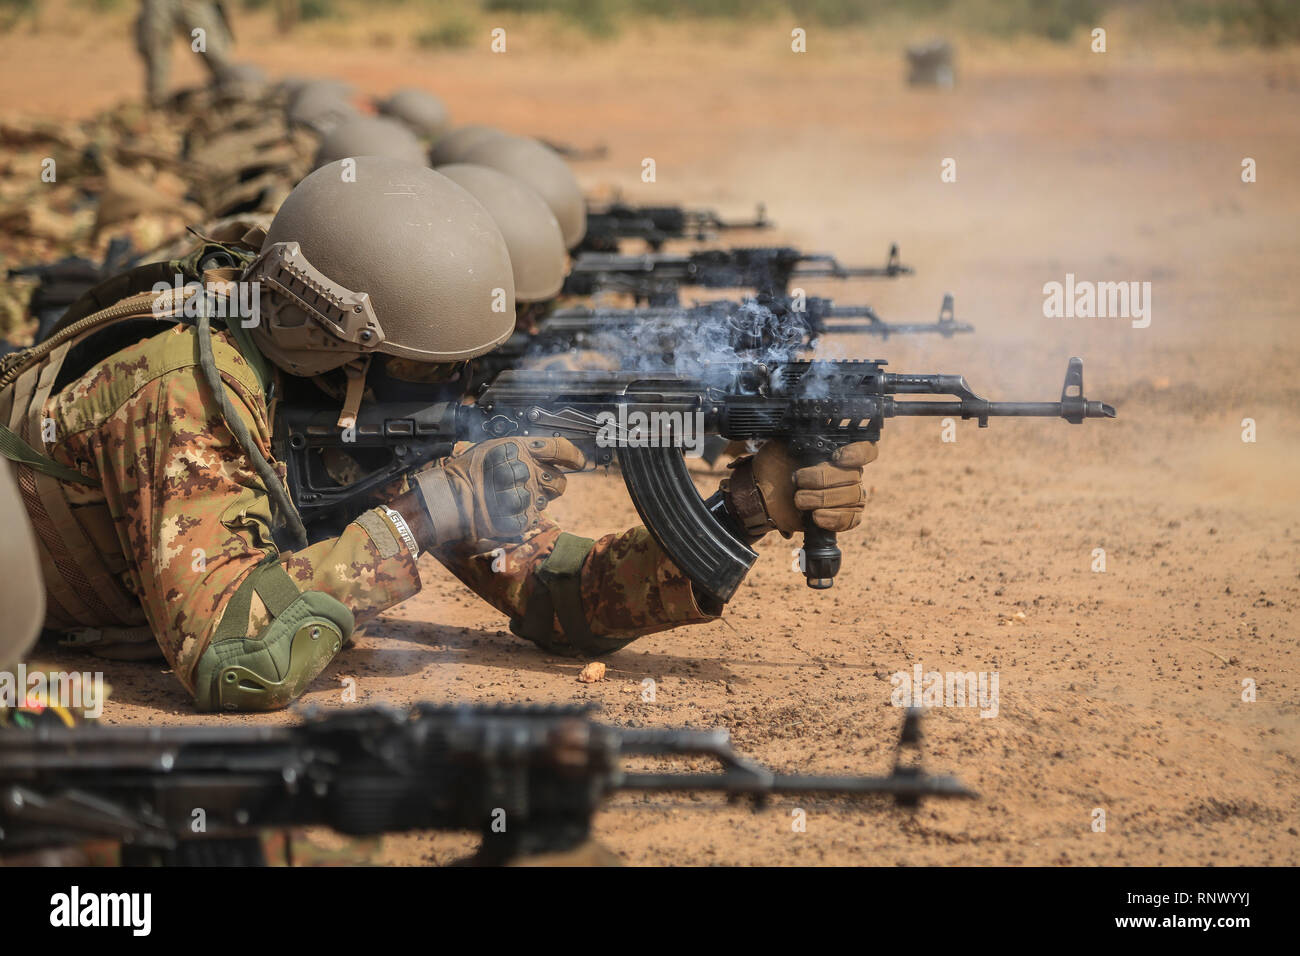 Malian soldiers zero their weapons near Loumbila, Burkina Faso Feb. 17, 2019. The live fire range presented an opportunity during exercise Flintlock 19 for the Malian Soldiers to maintain accurate weapons and tactics. Flintlock 2019 builds the capacity of participating nations to support regional cooperation, security and interoperability. (U.S Army photo by Spc. Peter Seidler) Stock Photo